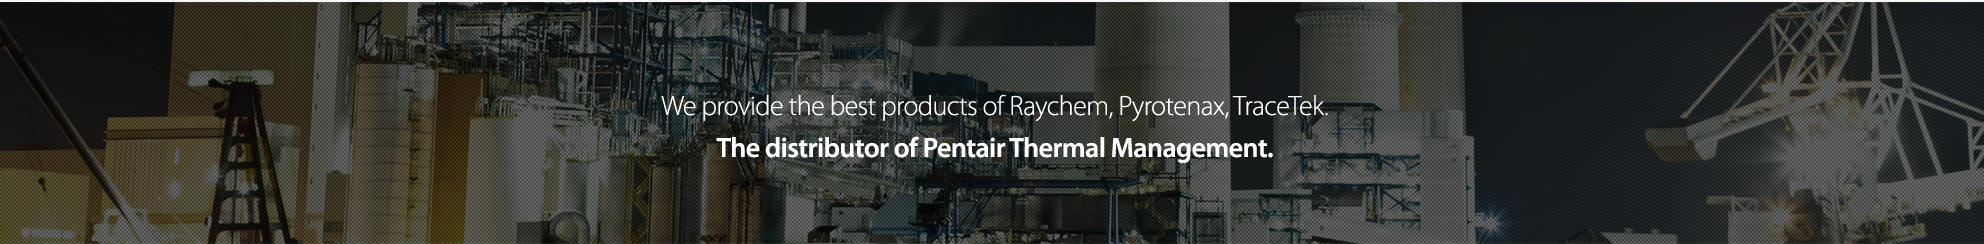 We are producing the best products of Raychem, pyrotenax, isopad, tracetex The representative of the United States Korea Tycothermal Controls.